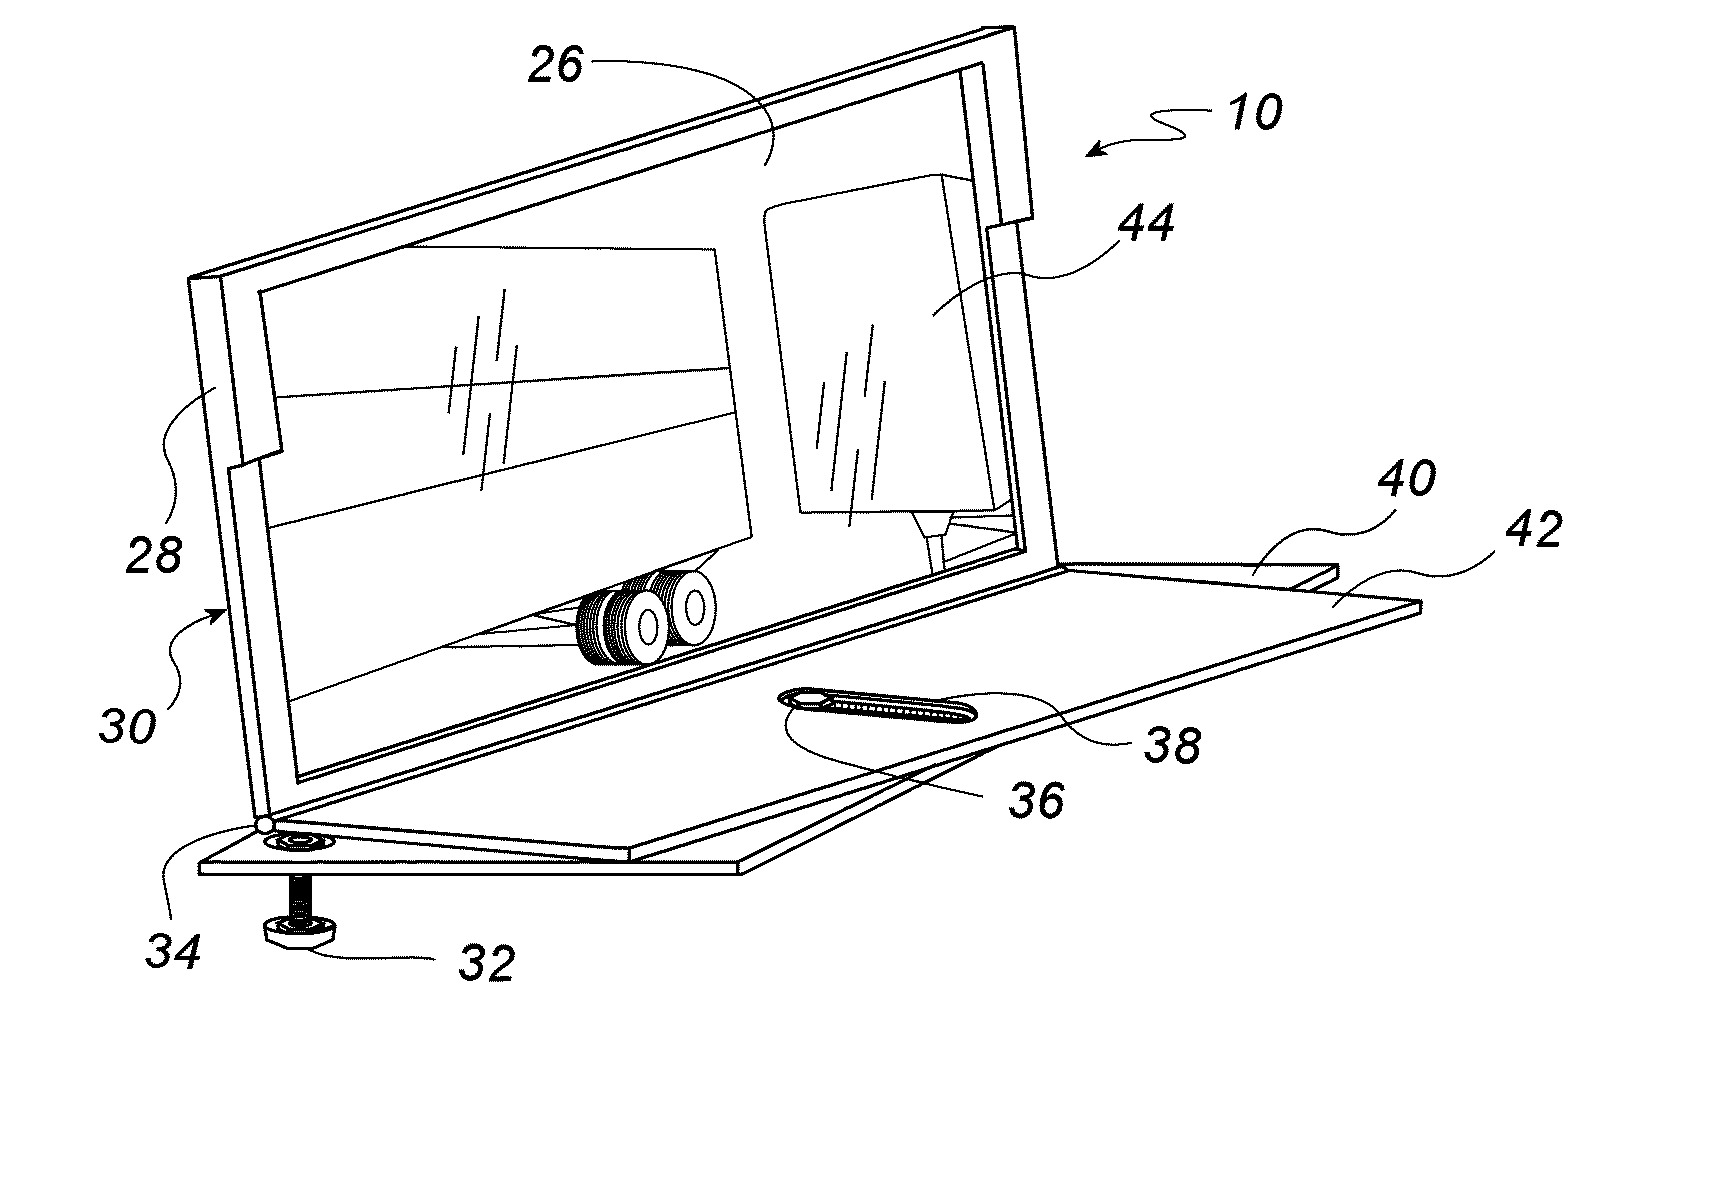 Portable Wide-View Mirror for Blind-Side Backing of a Semi-Tractor Trailer